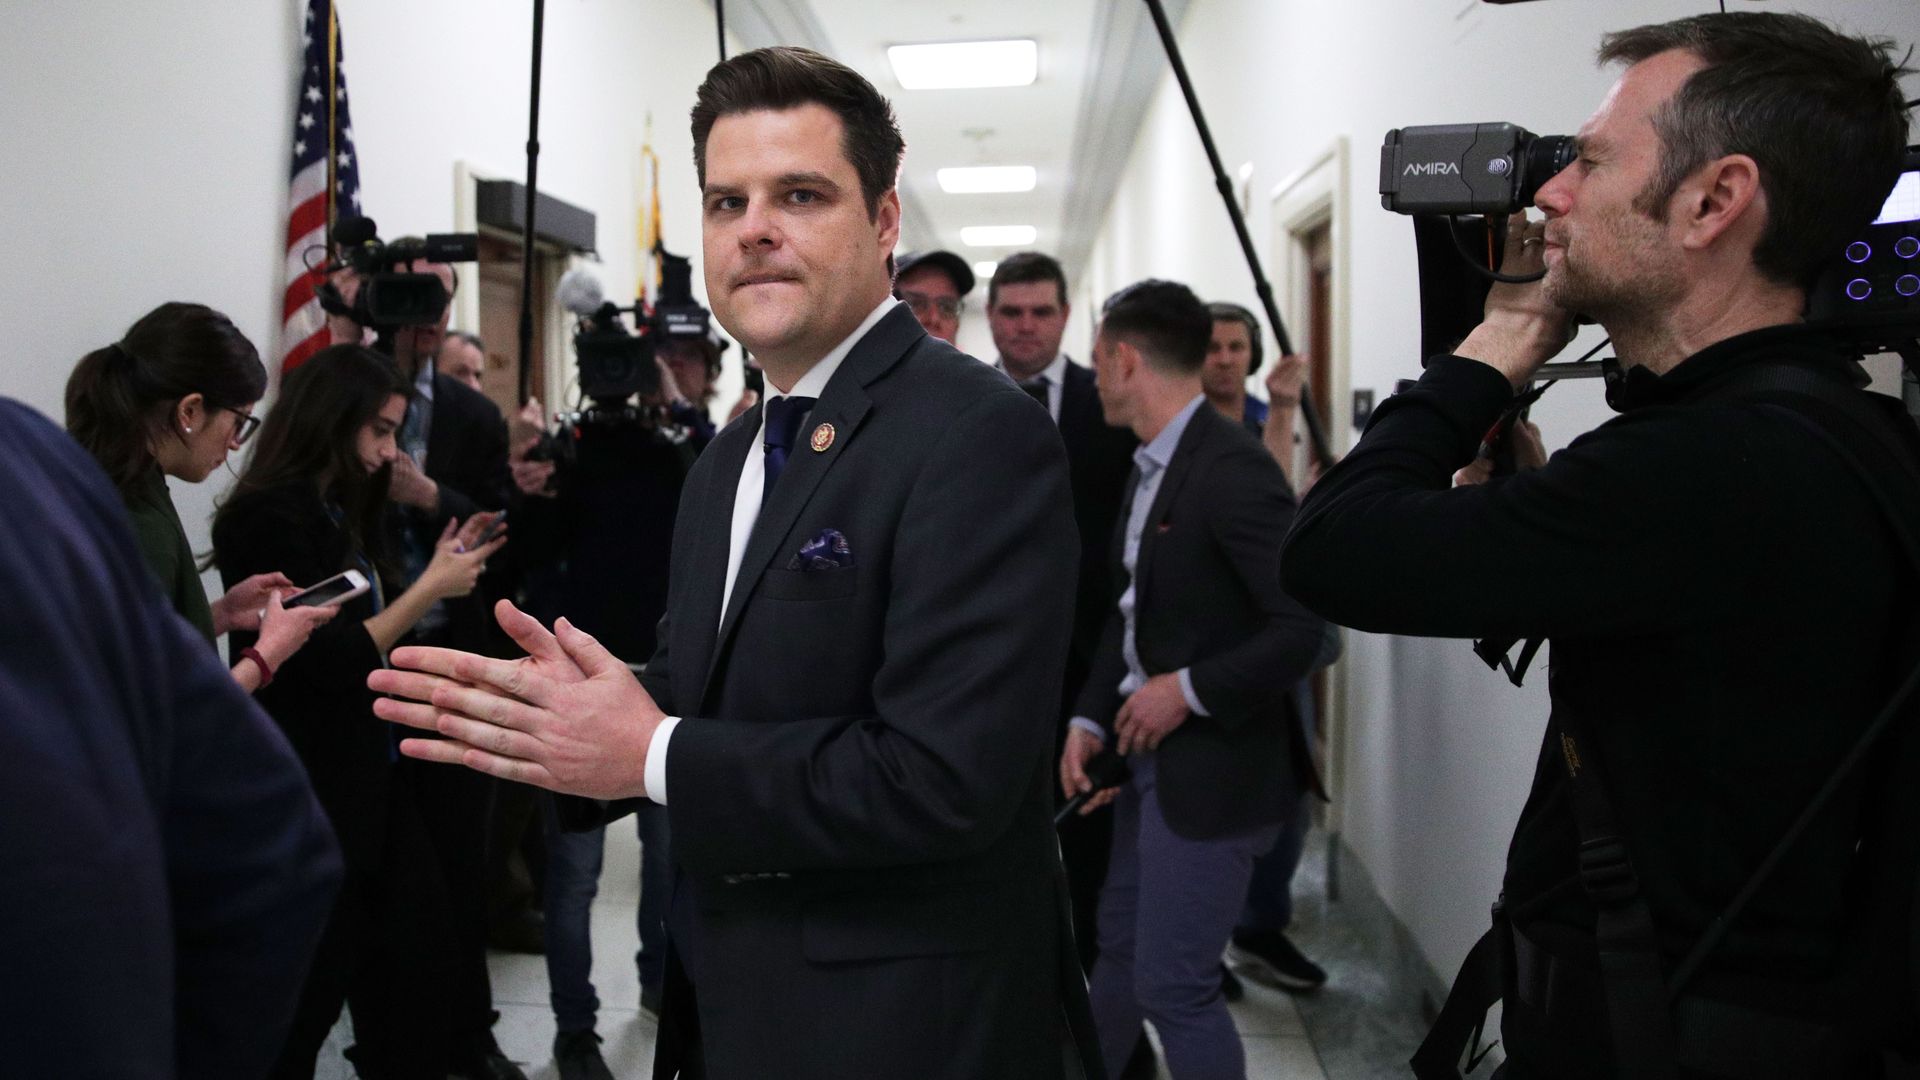 Rep. Matt Gaetz of Florida is seen in a hall on Capitol Hill.